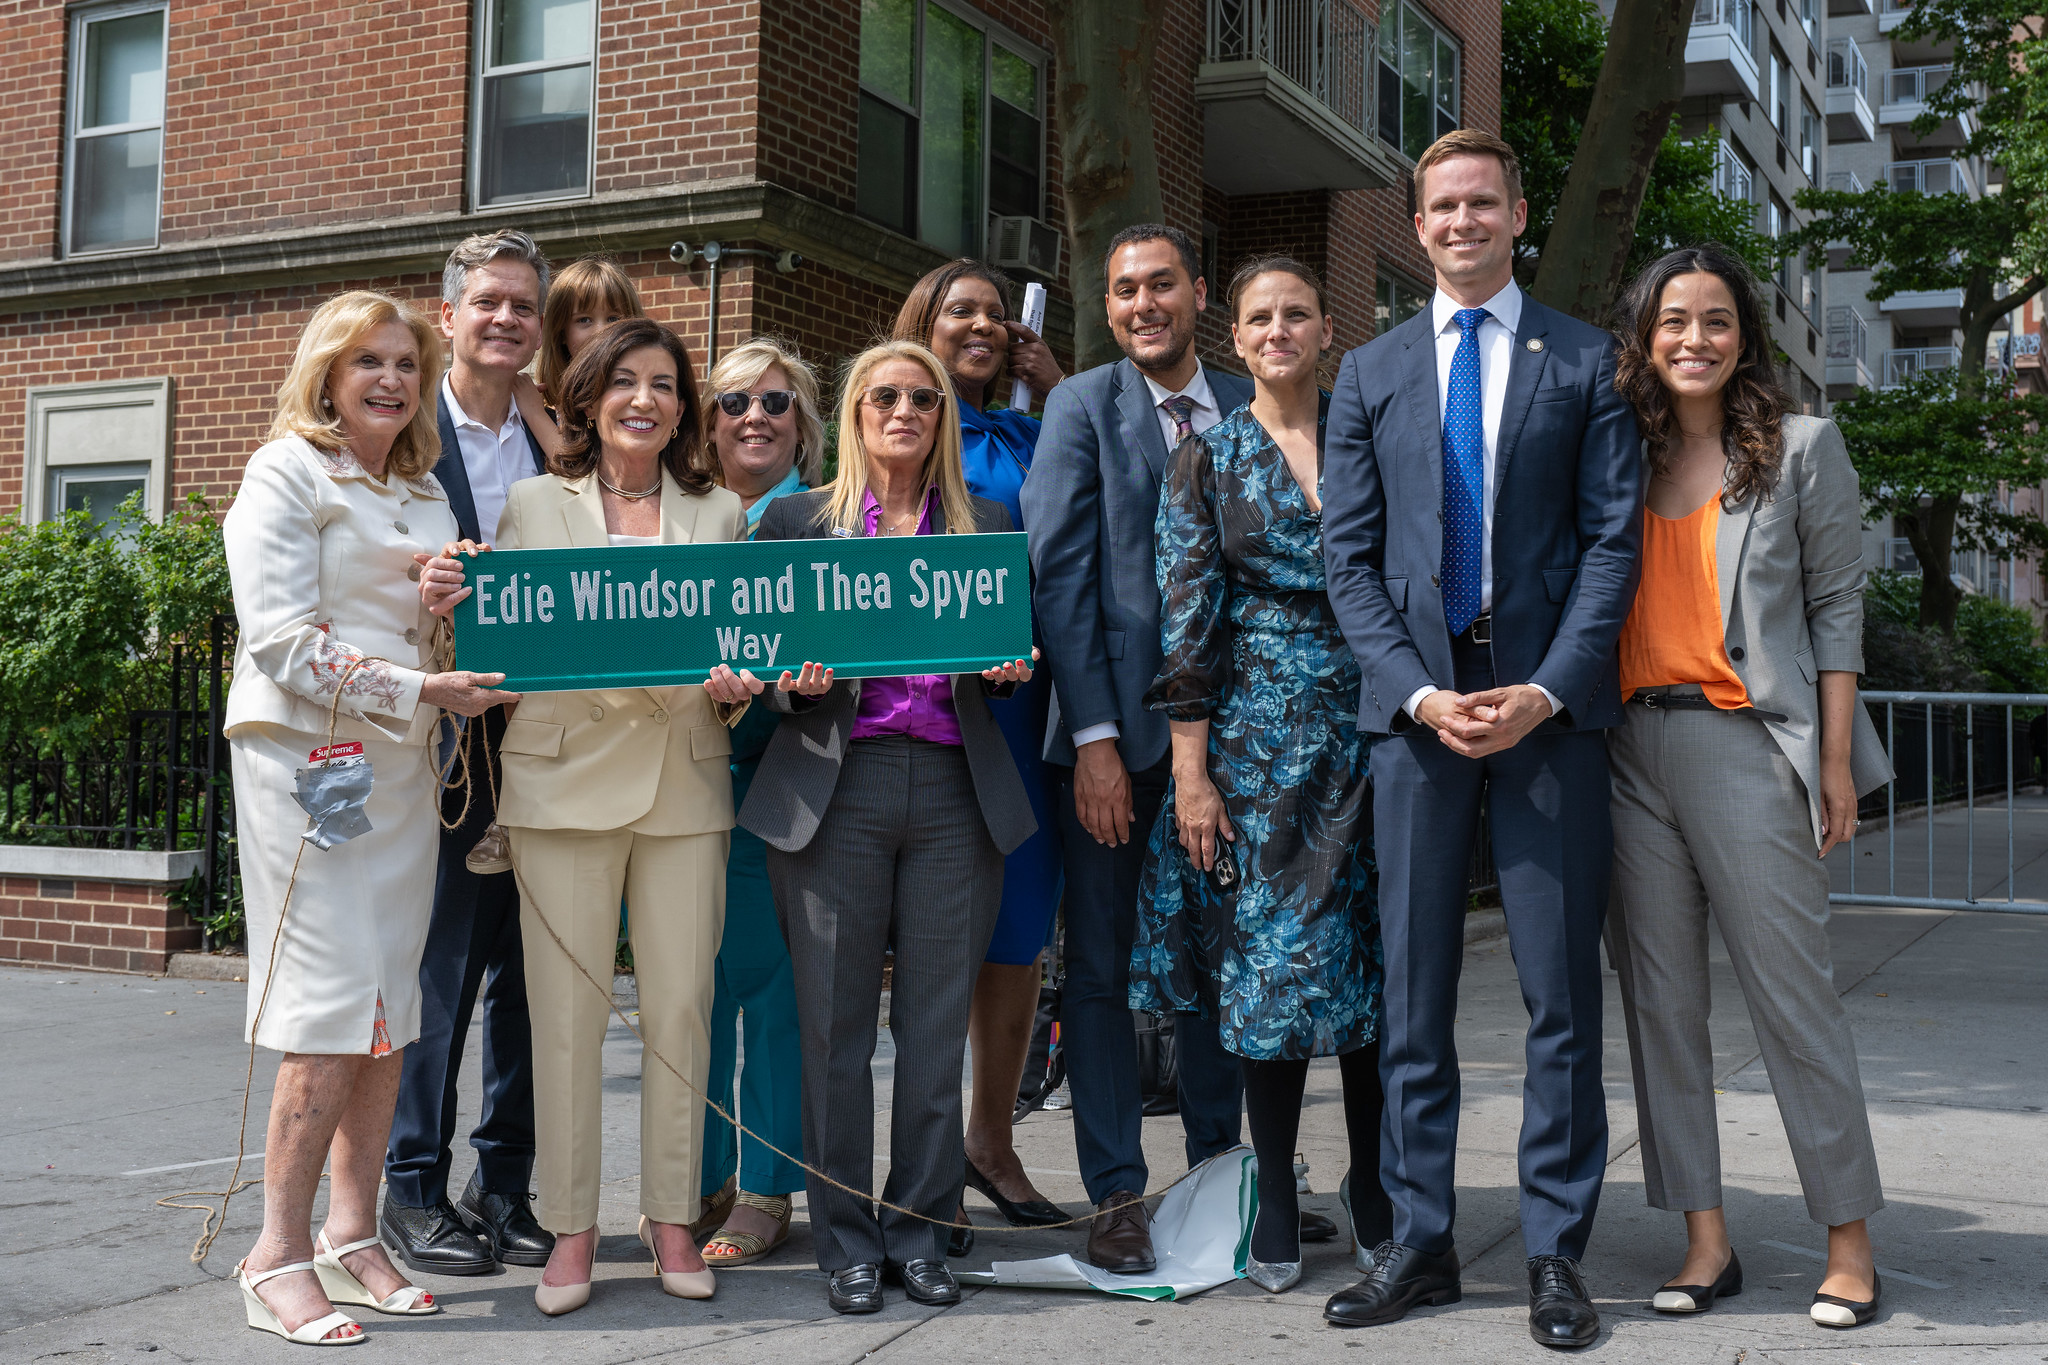 Governor Hochul, Judith Kasen Windsor and AG Letitia James pose with NY elected officials and a copy of the new street sign.